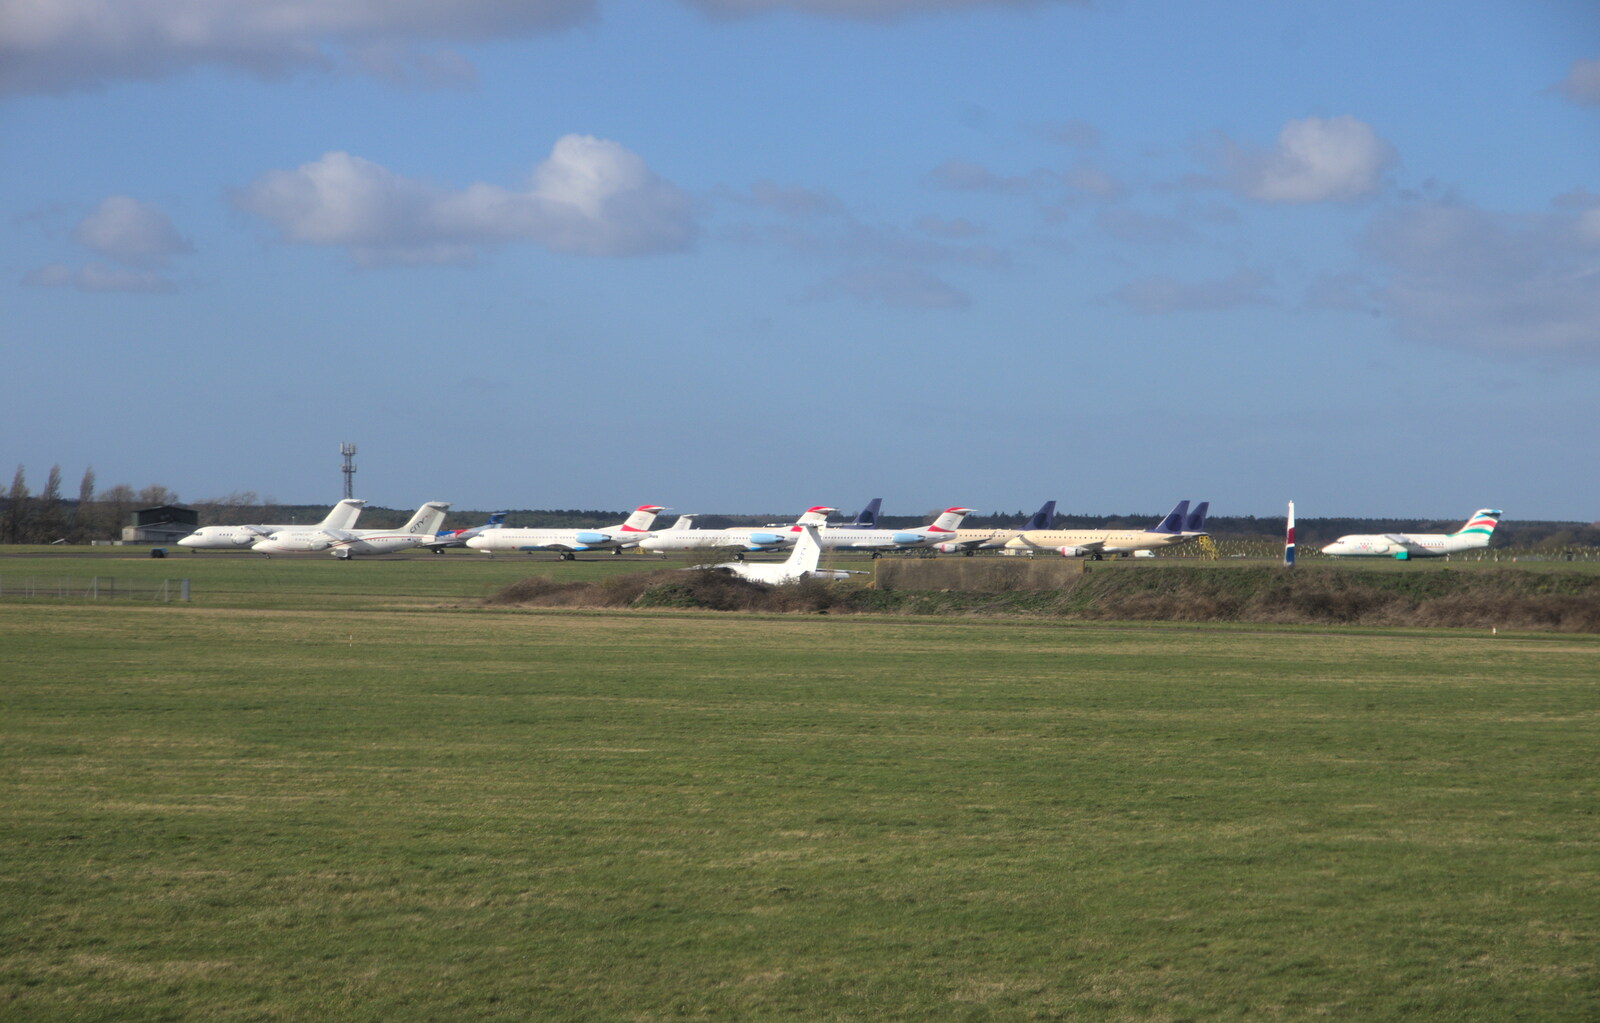 A stack of mystery aircraft on the airport perimeter from Devon In A Day, Exeter, Devon - 14th March 2019